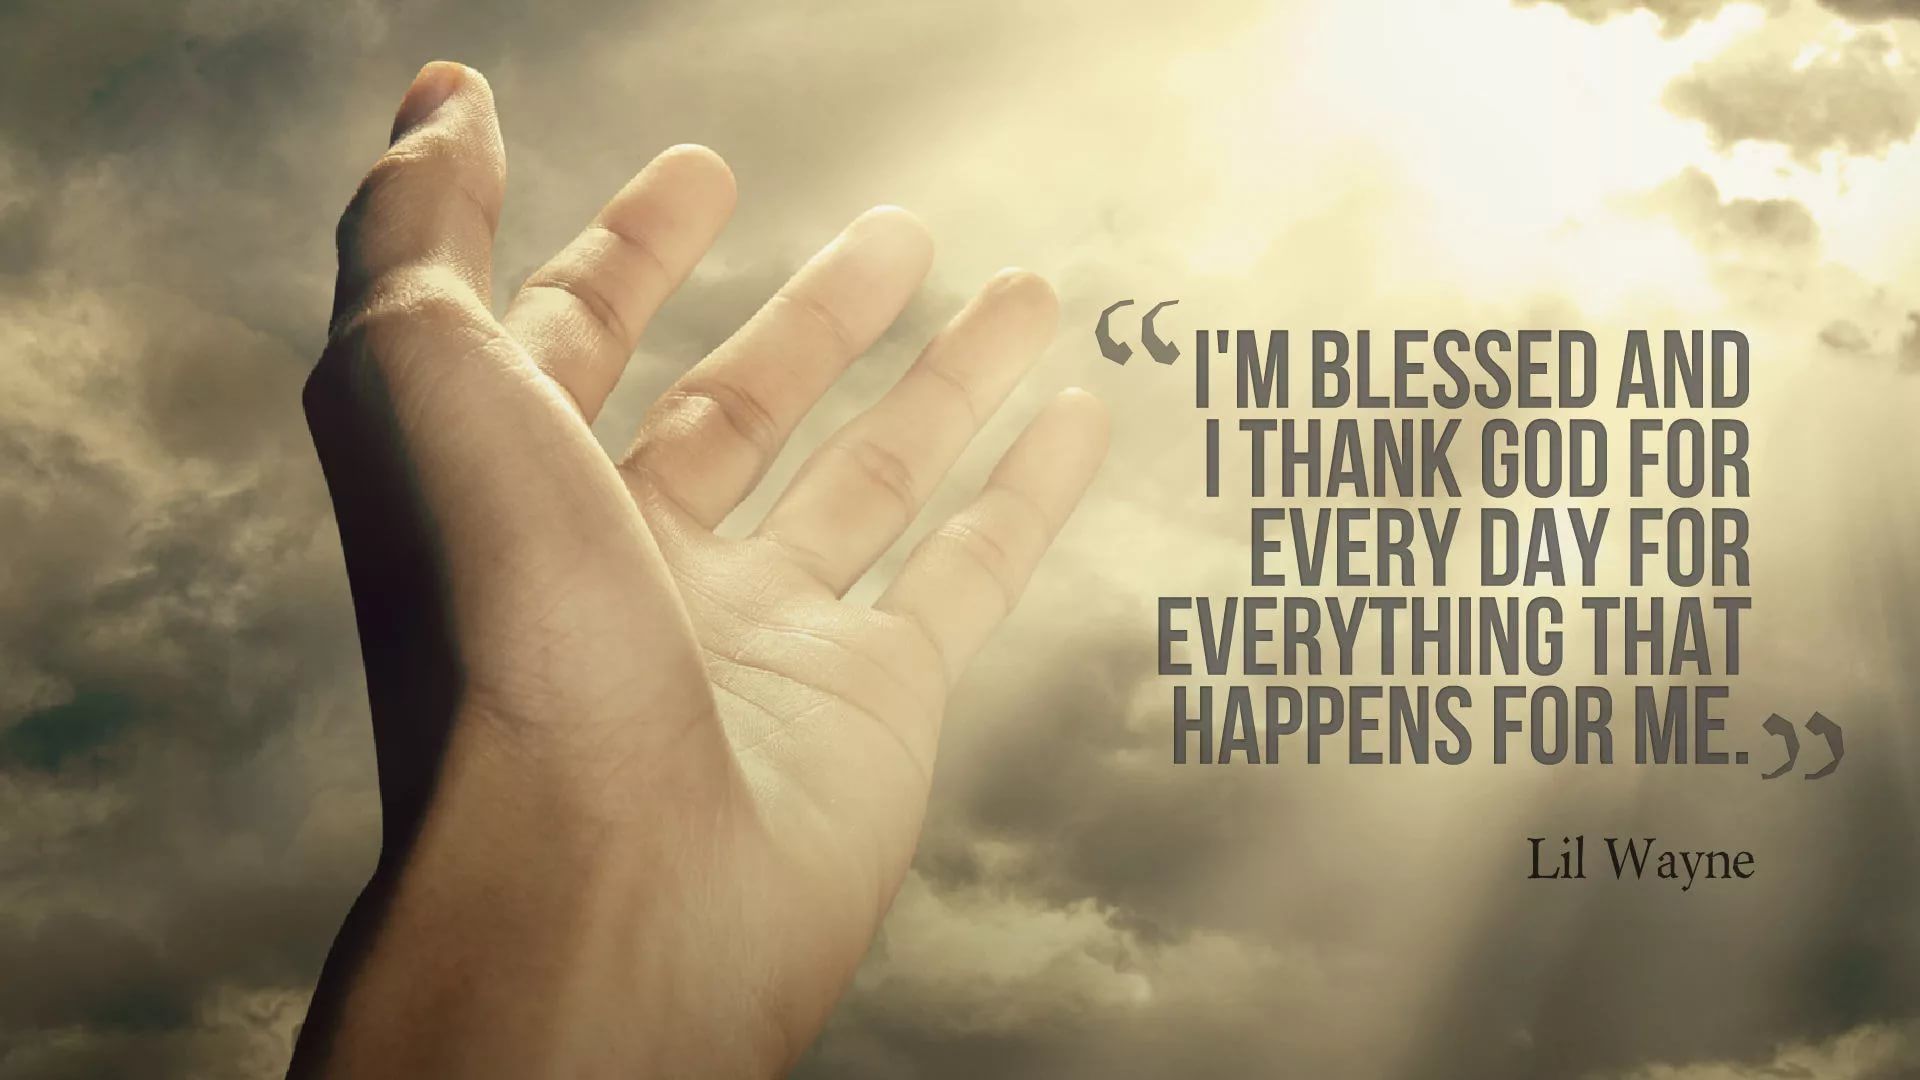 Praying Hands Vertical Wallpaper HD Quotes Image HD